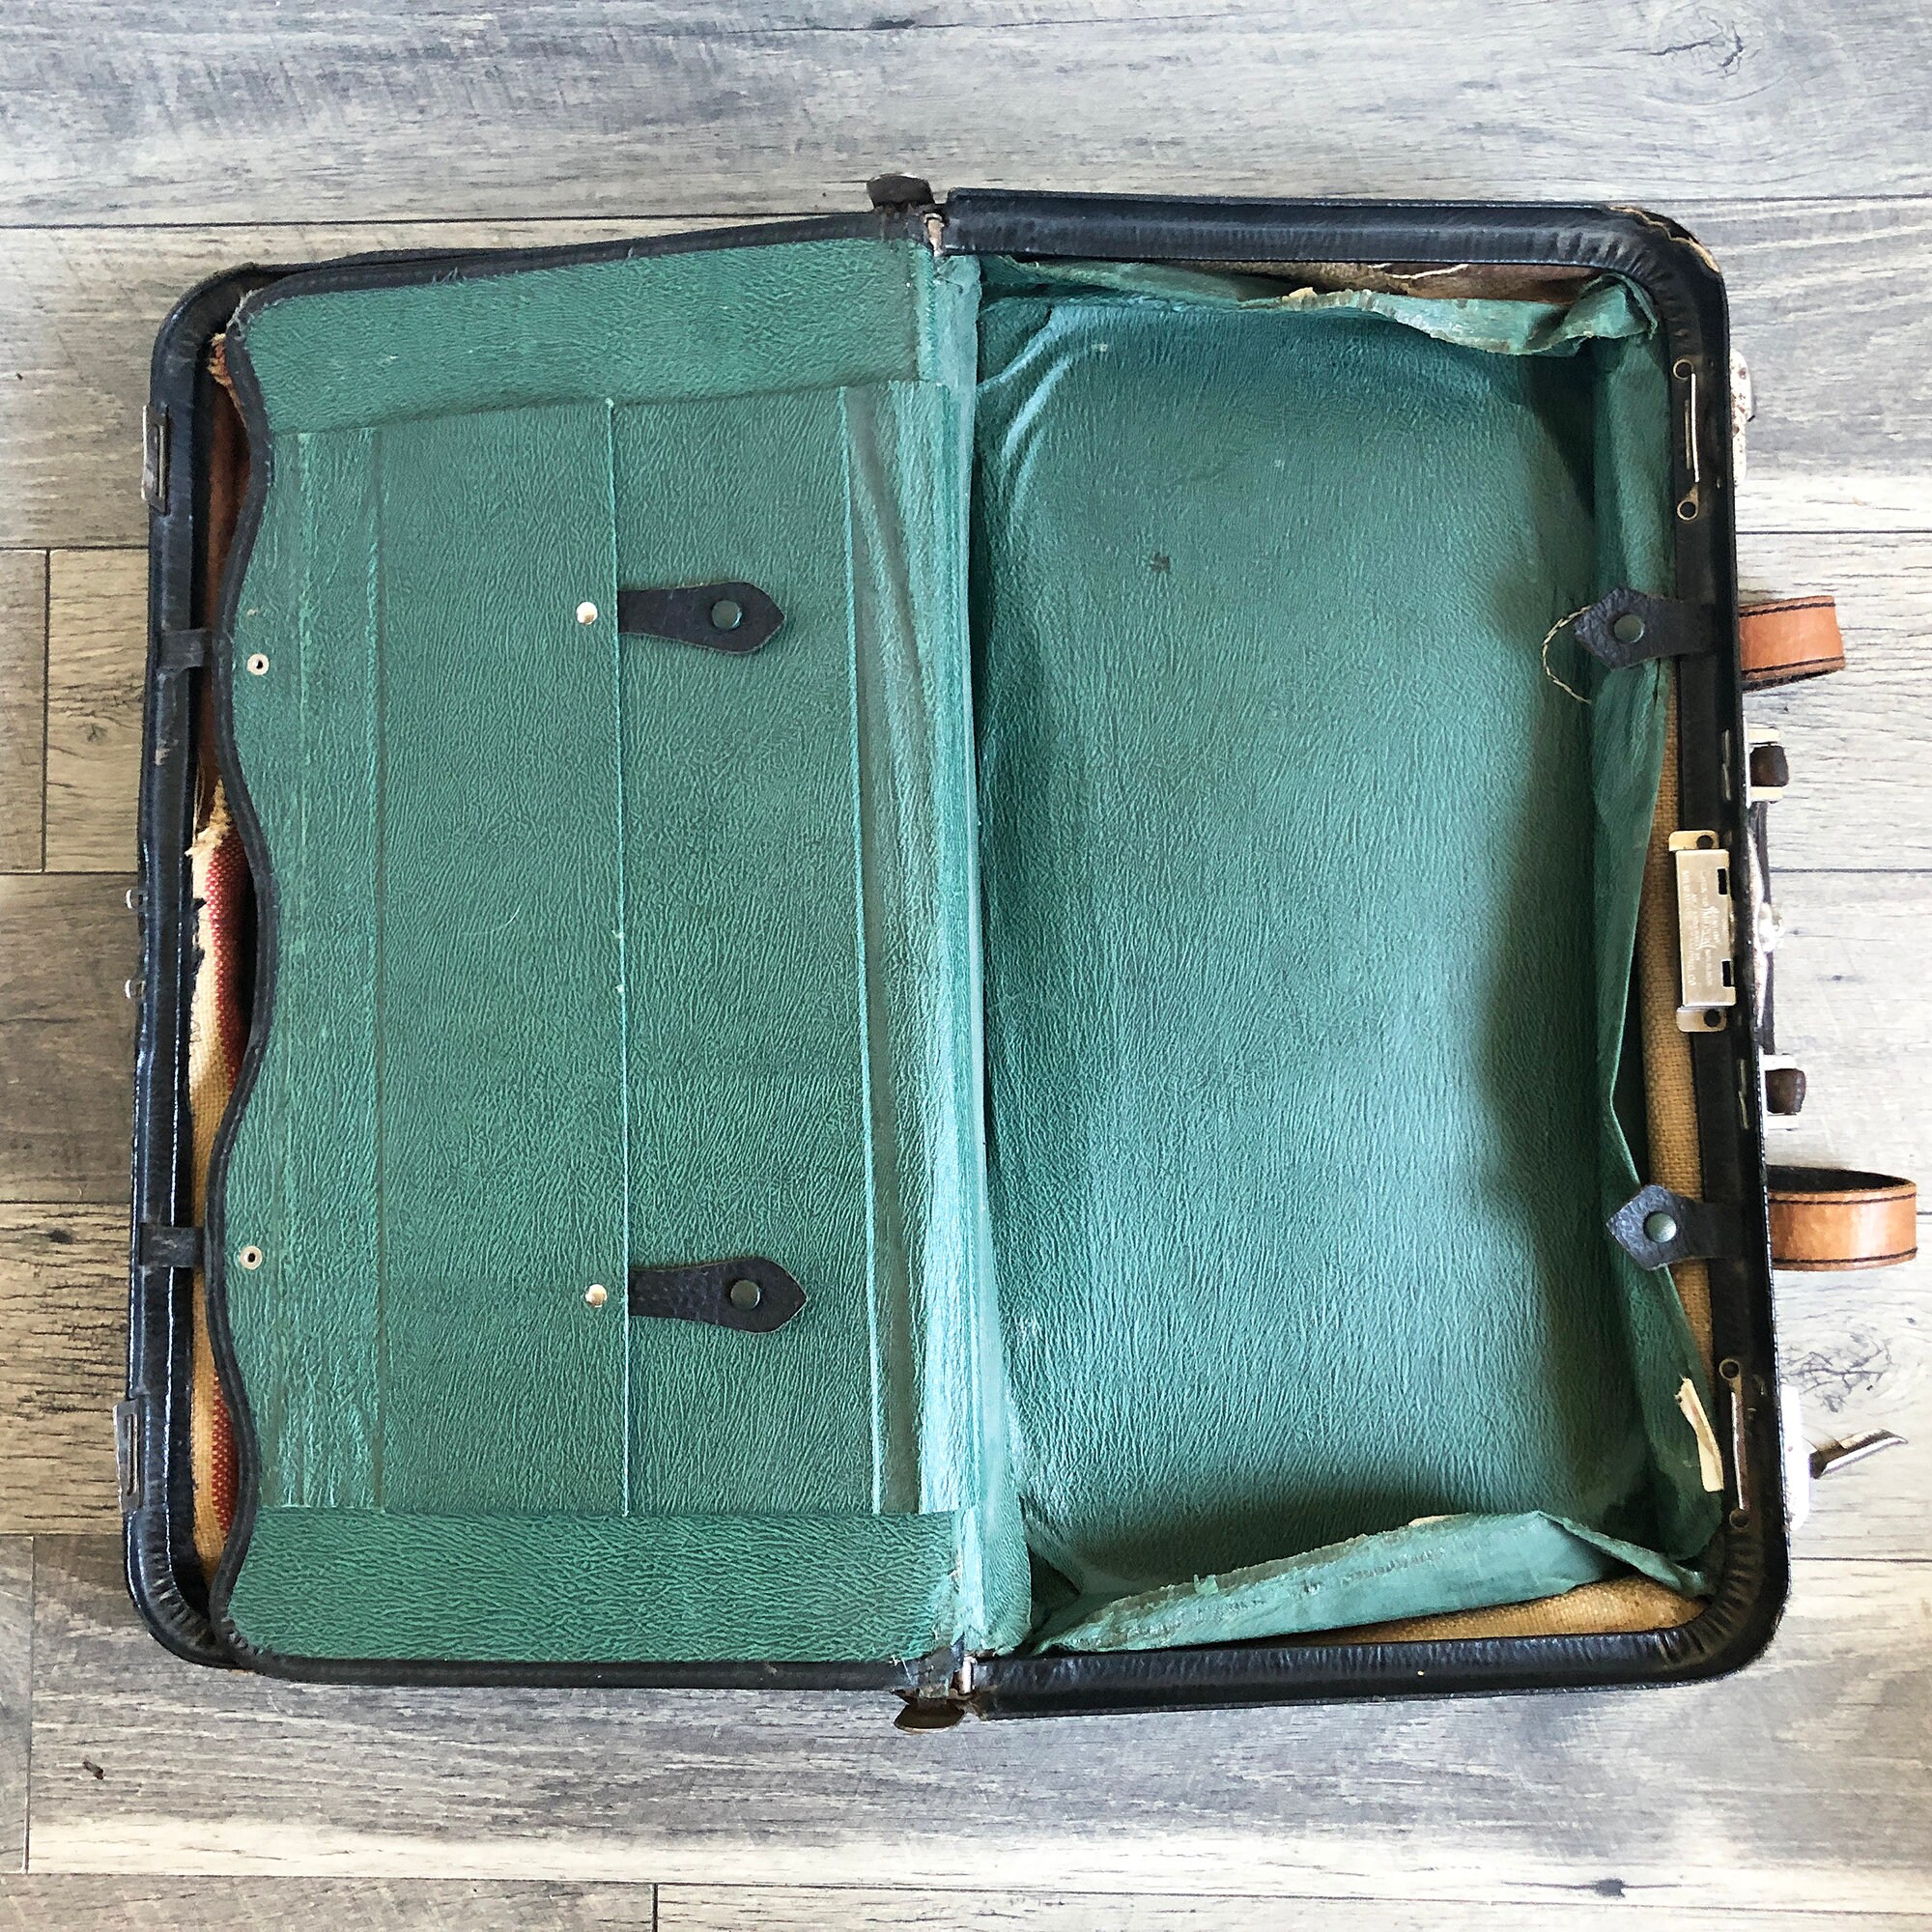 old suitcase or luggage w/leather handle 1920s/1930s vintage